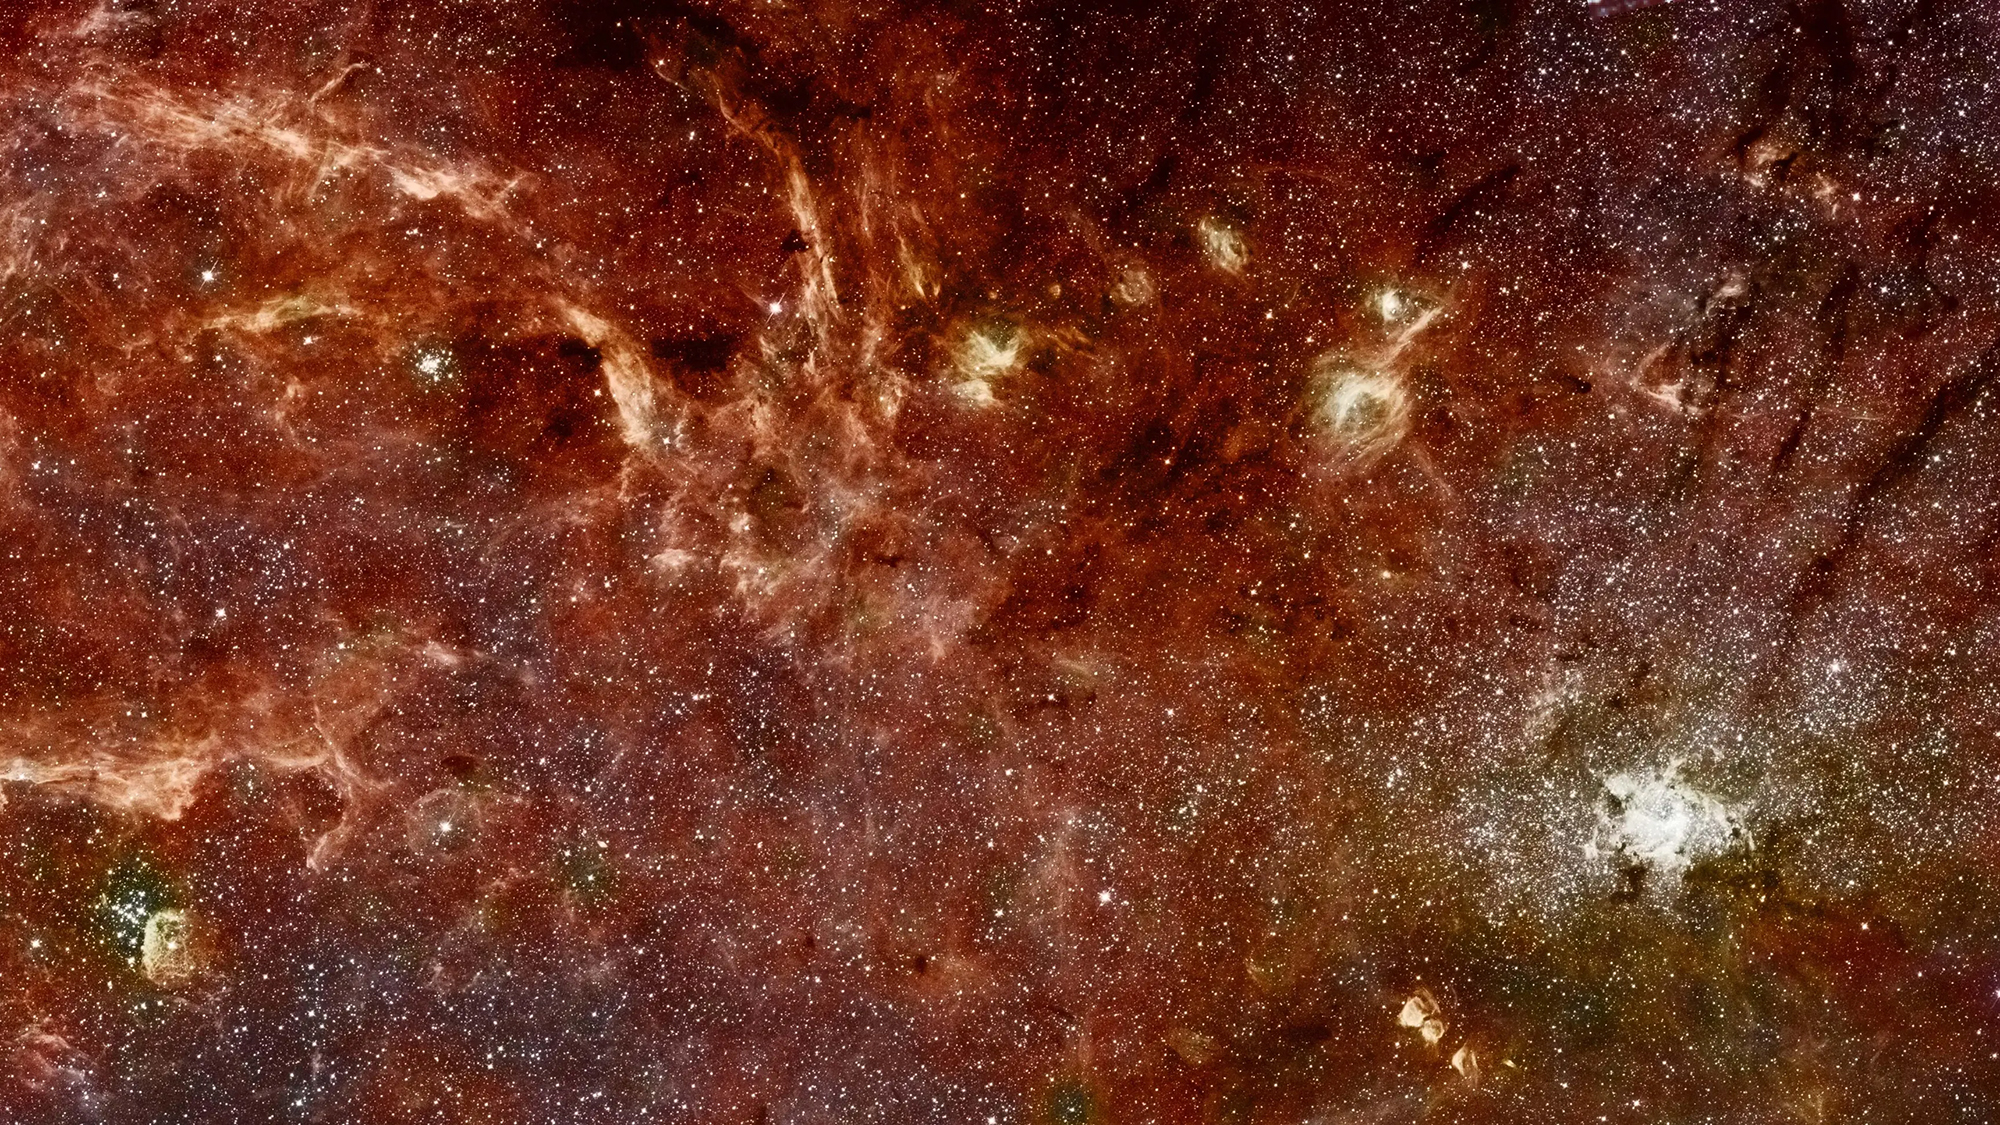 An image of the core of our Milky Way galaxy. This view combines the sharp imaging of Hubble’s Near Infrared Camera and Multi-Object Spectrometer (NICMOS) with color imagery from a previous Spitzer Space Telescope survey done with its Infrared Astronomy Camera (IRAC).